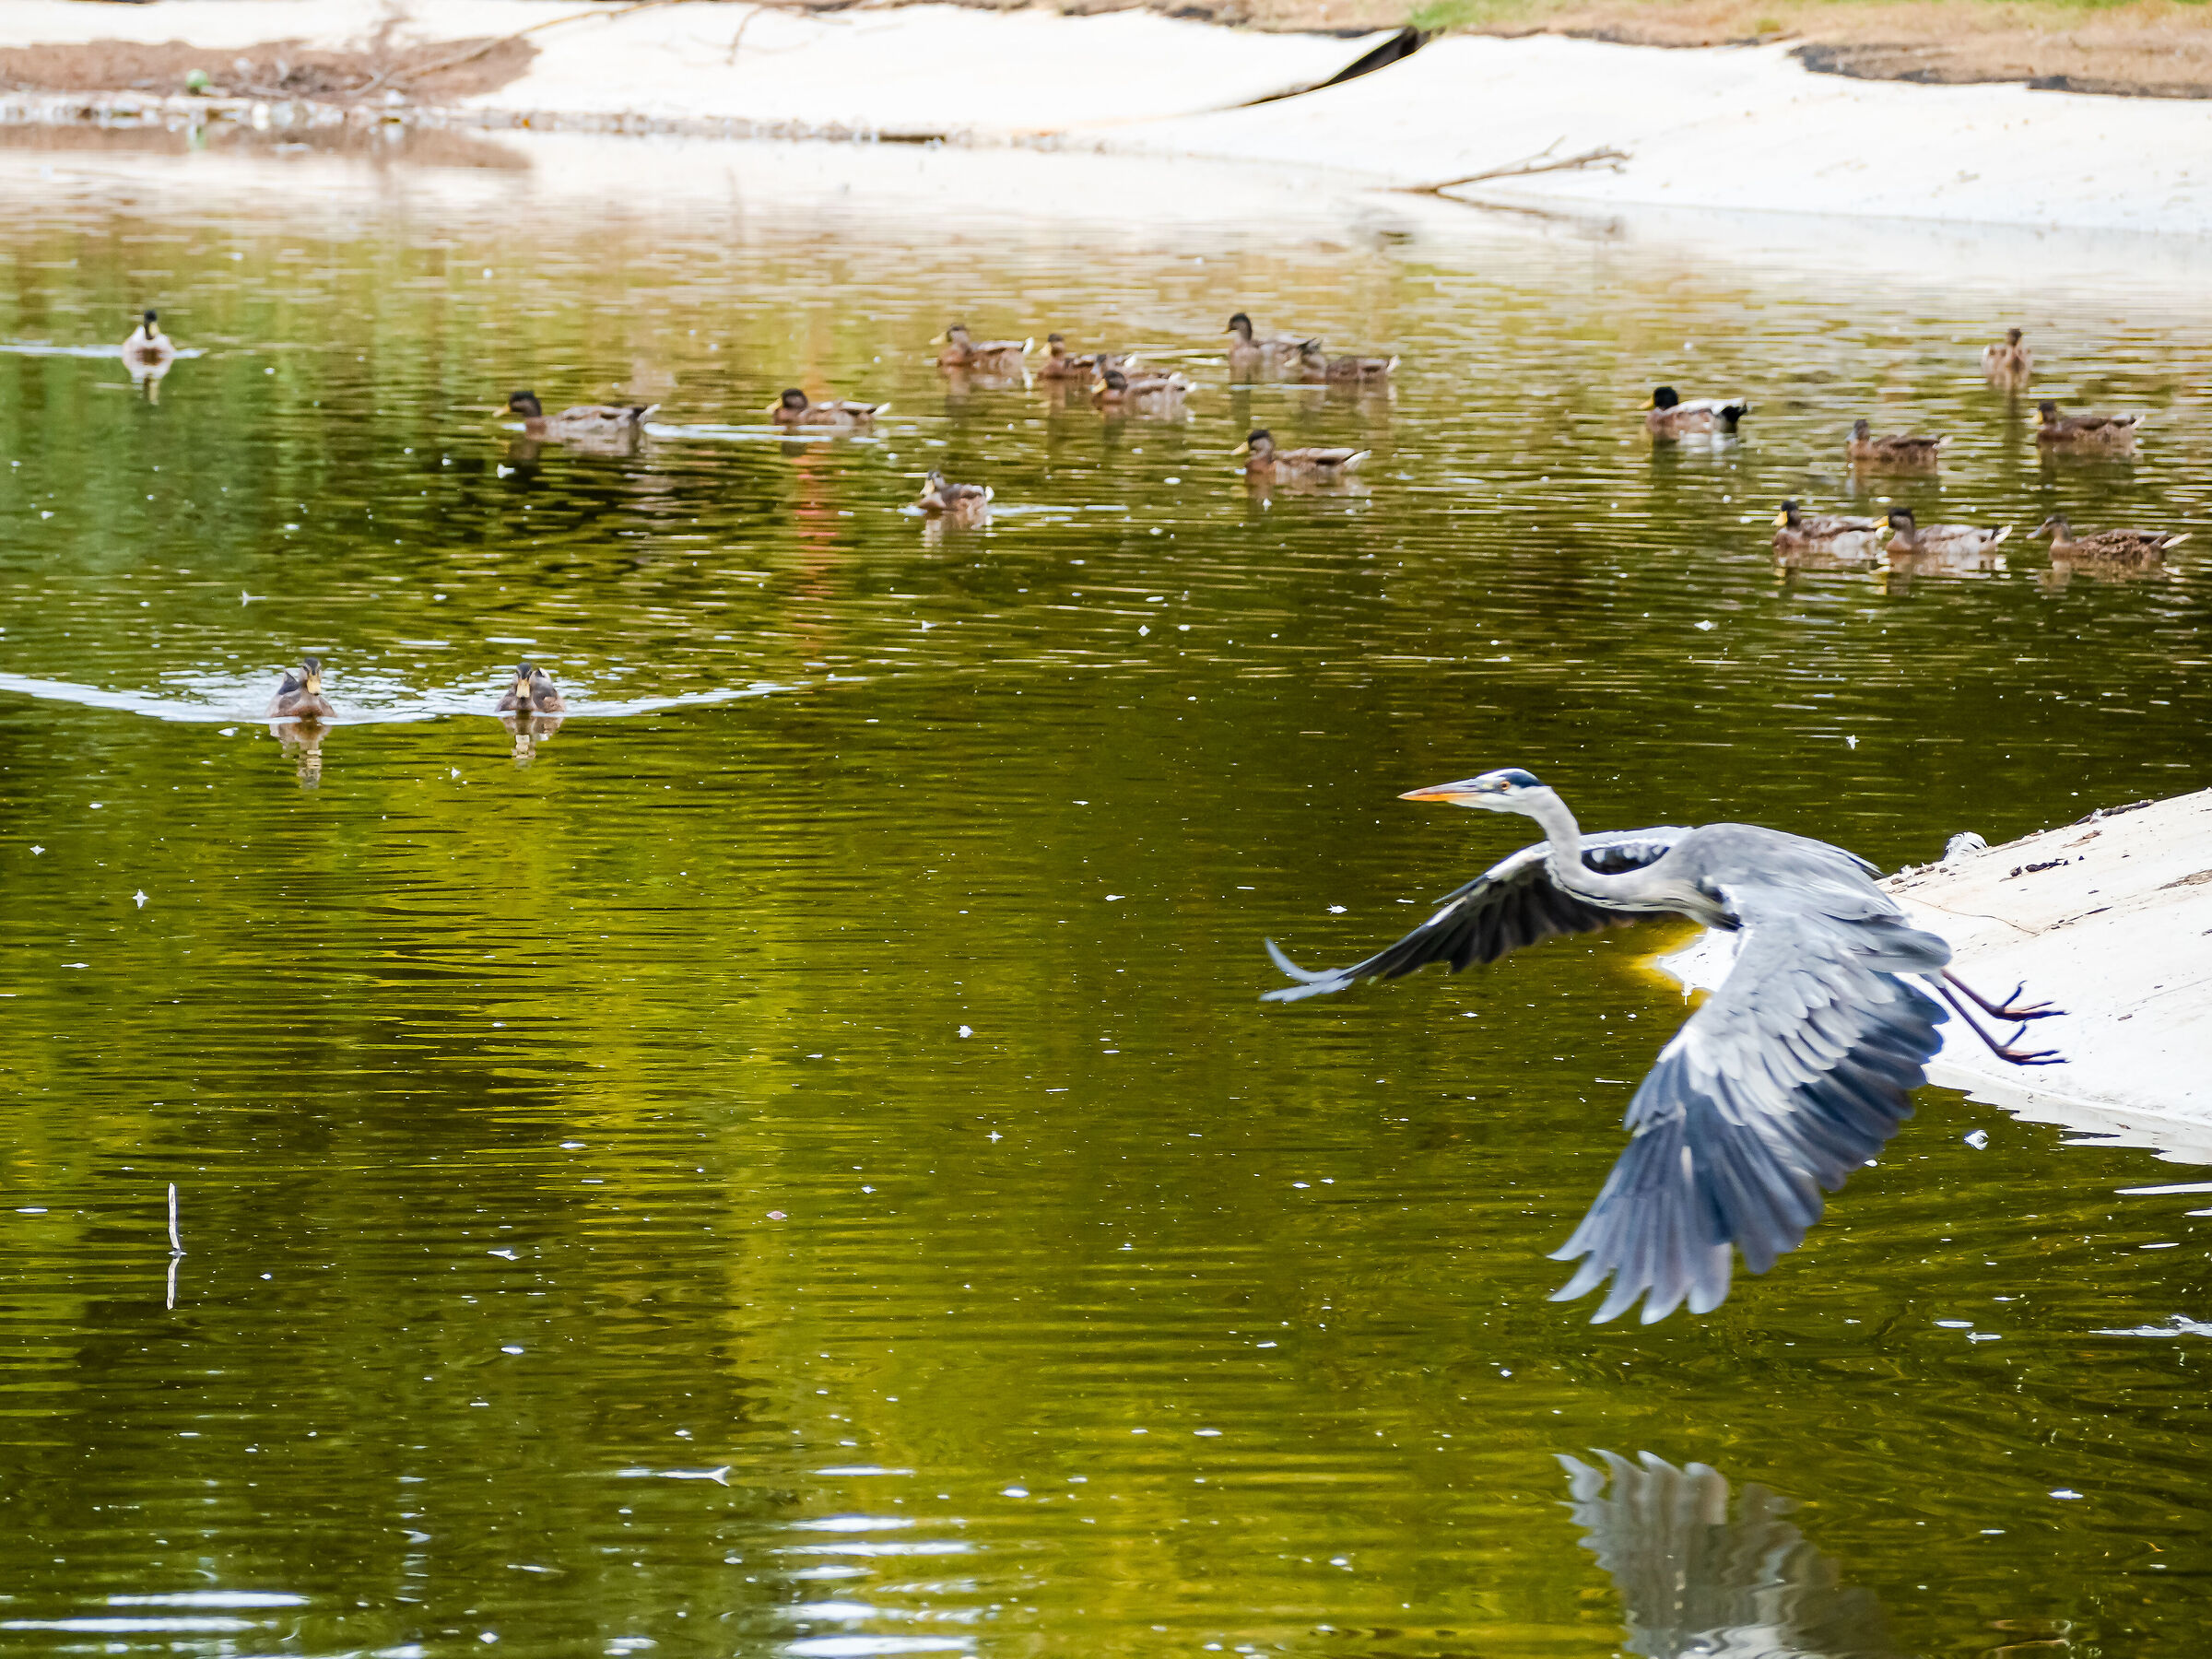 Heron flying over an artificial pond...